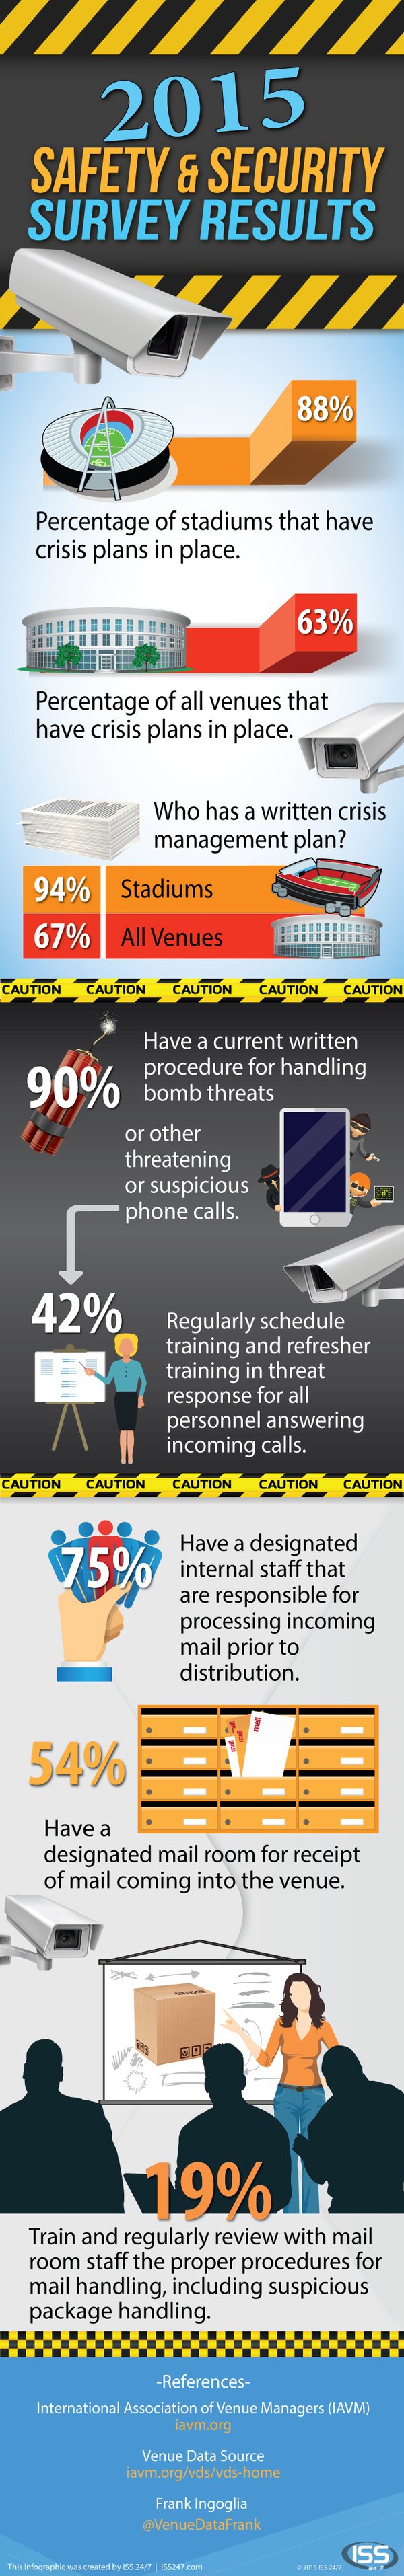 2015 Safety and Security Survey Results